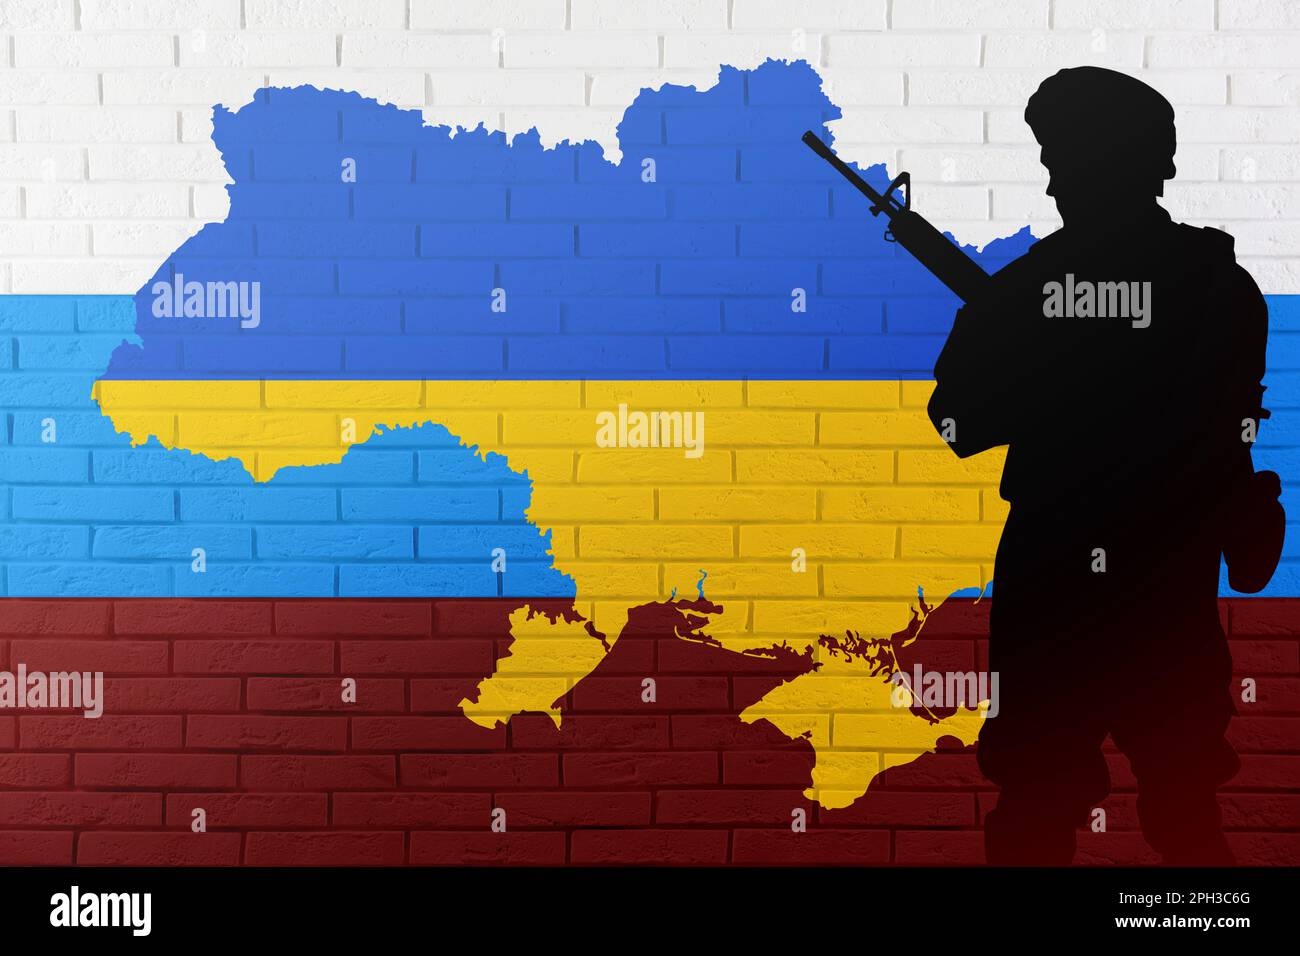 Russian-Ukrainian war. Silhouette of soldier against brick wall with outline map of Ukraine and Russian flag Stock Photo